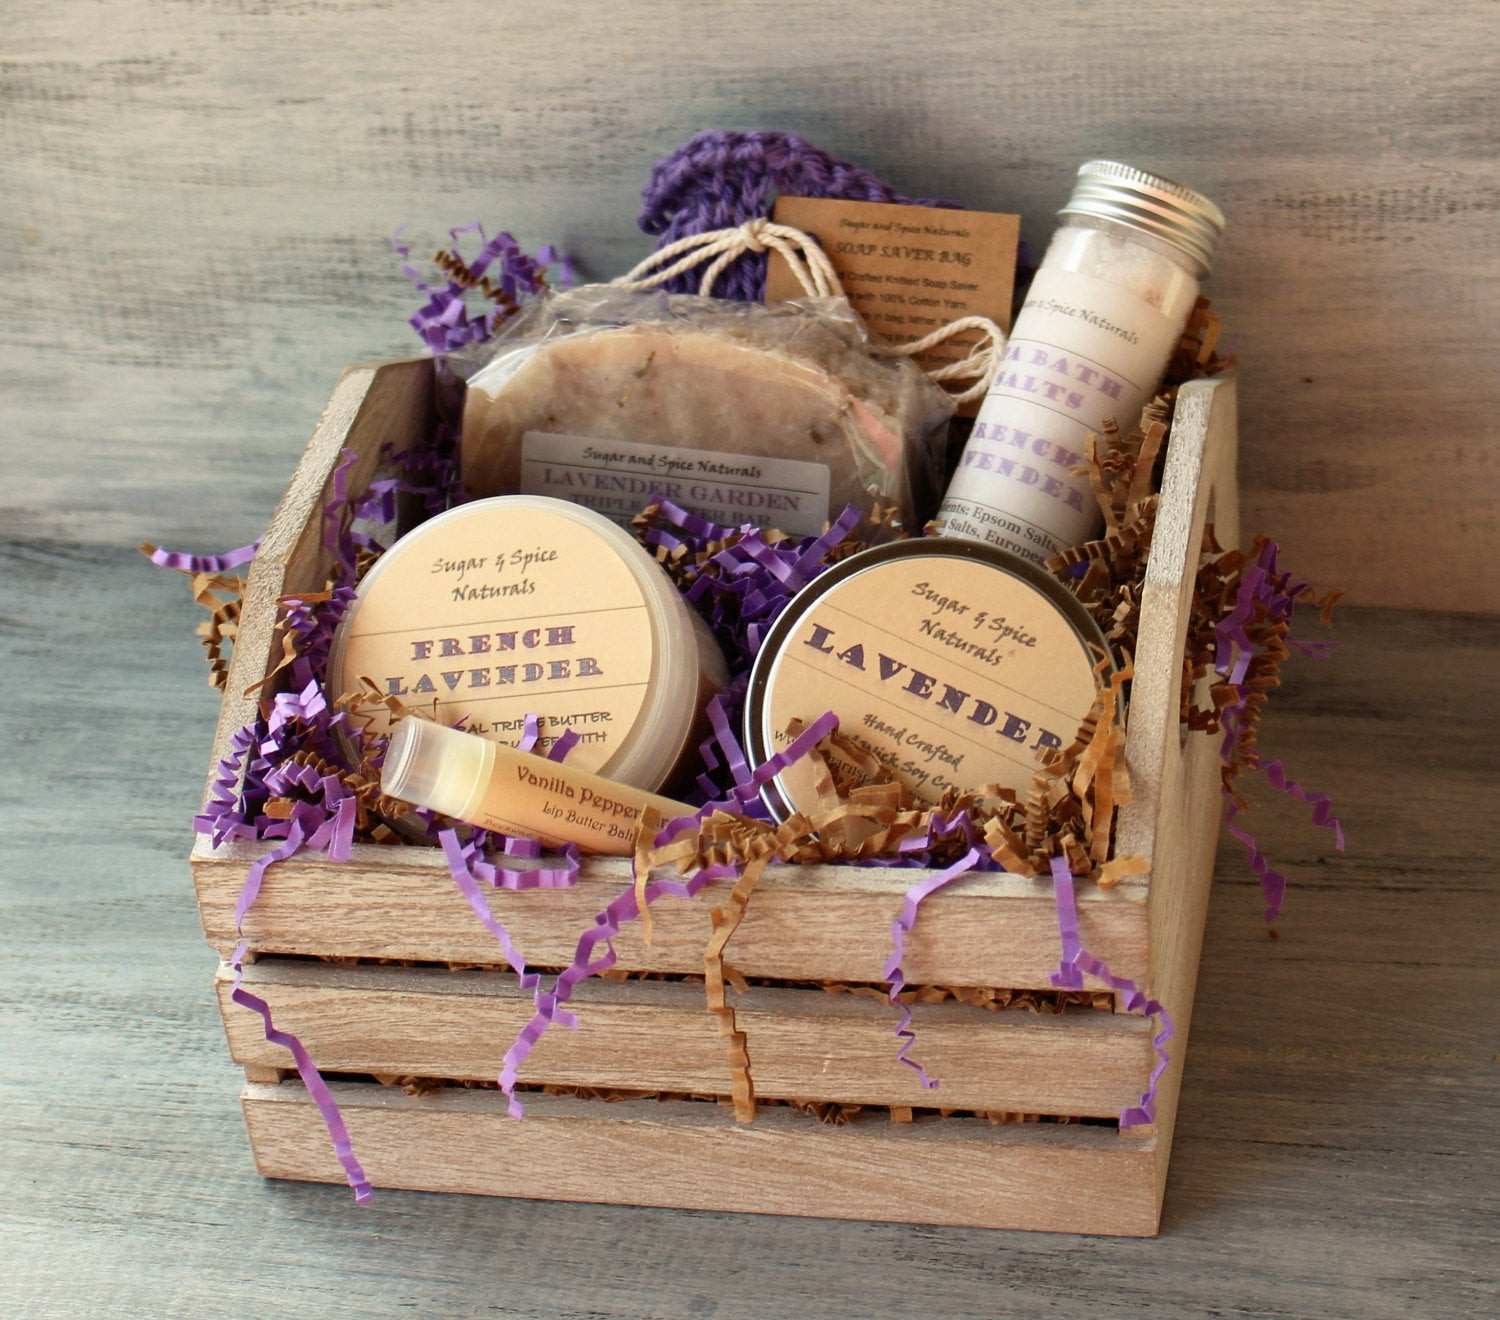 Soap Gift Basket Ideas
 Lavender Soap Spa Bath & Body Gift Basket with Soap French